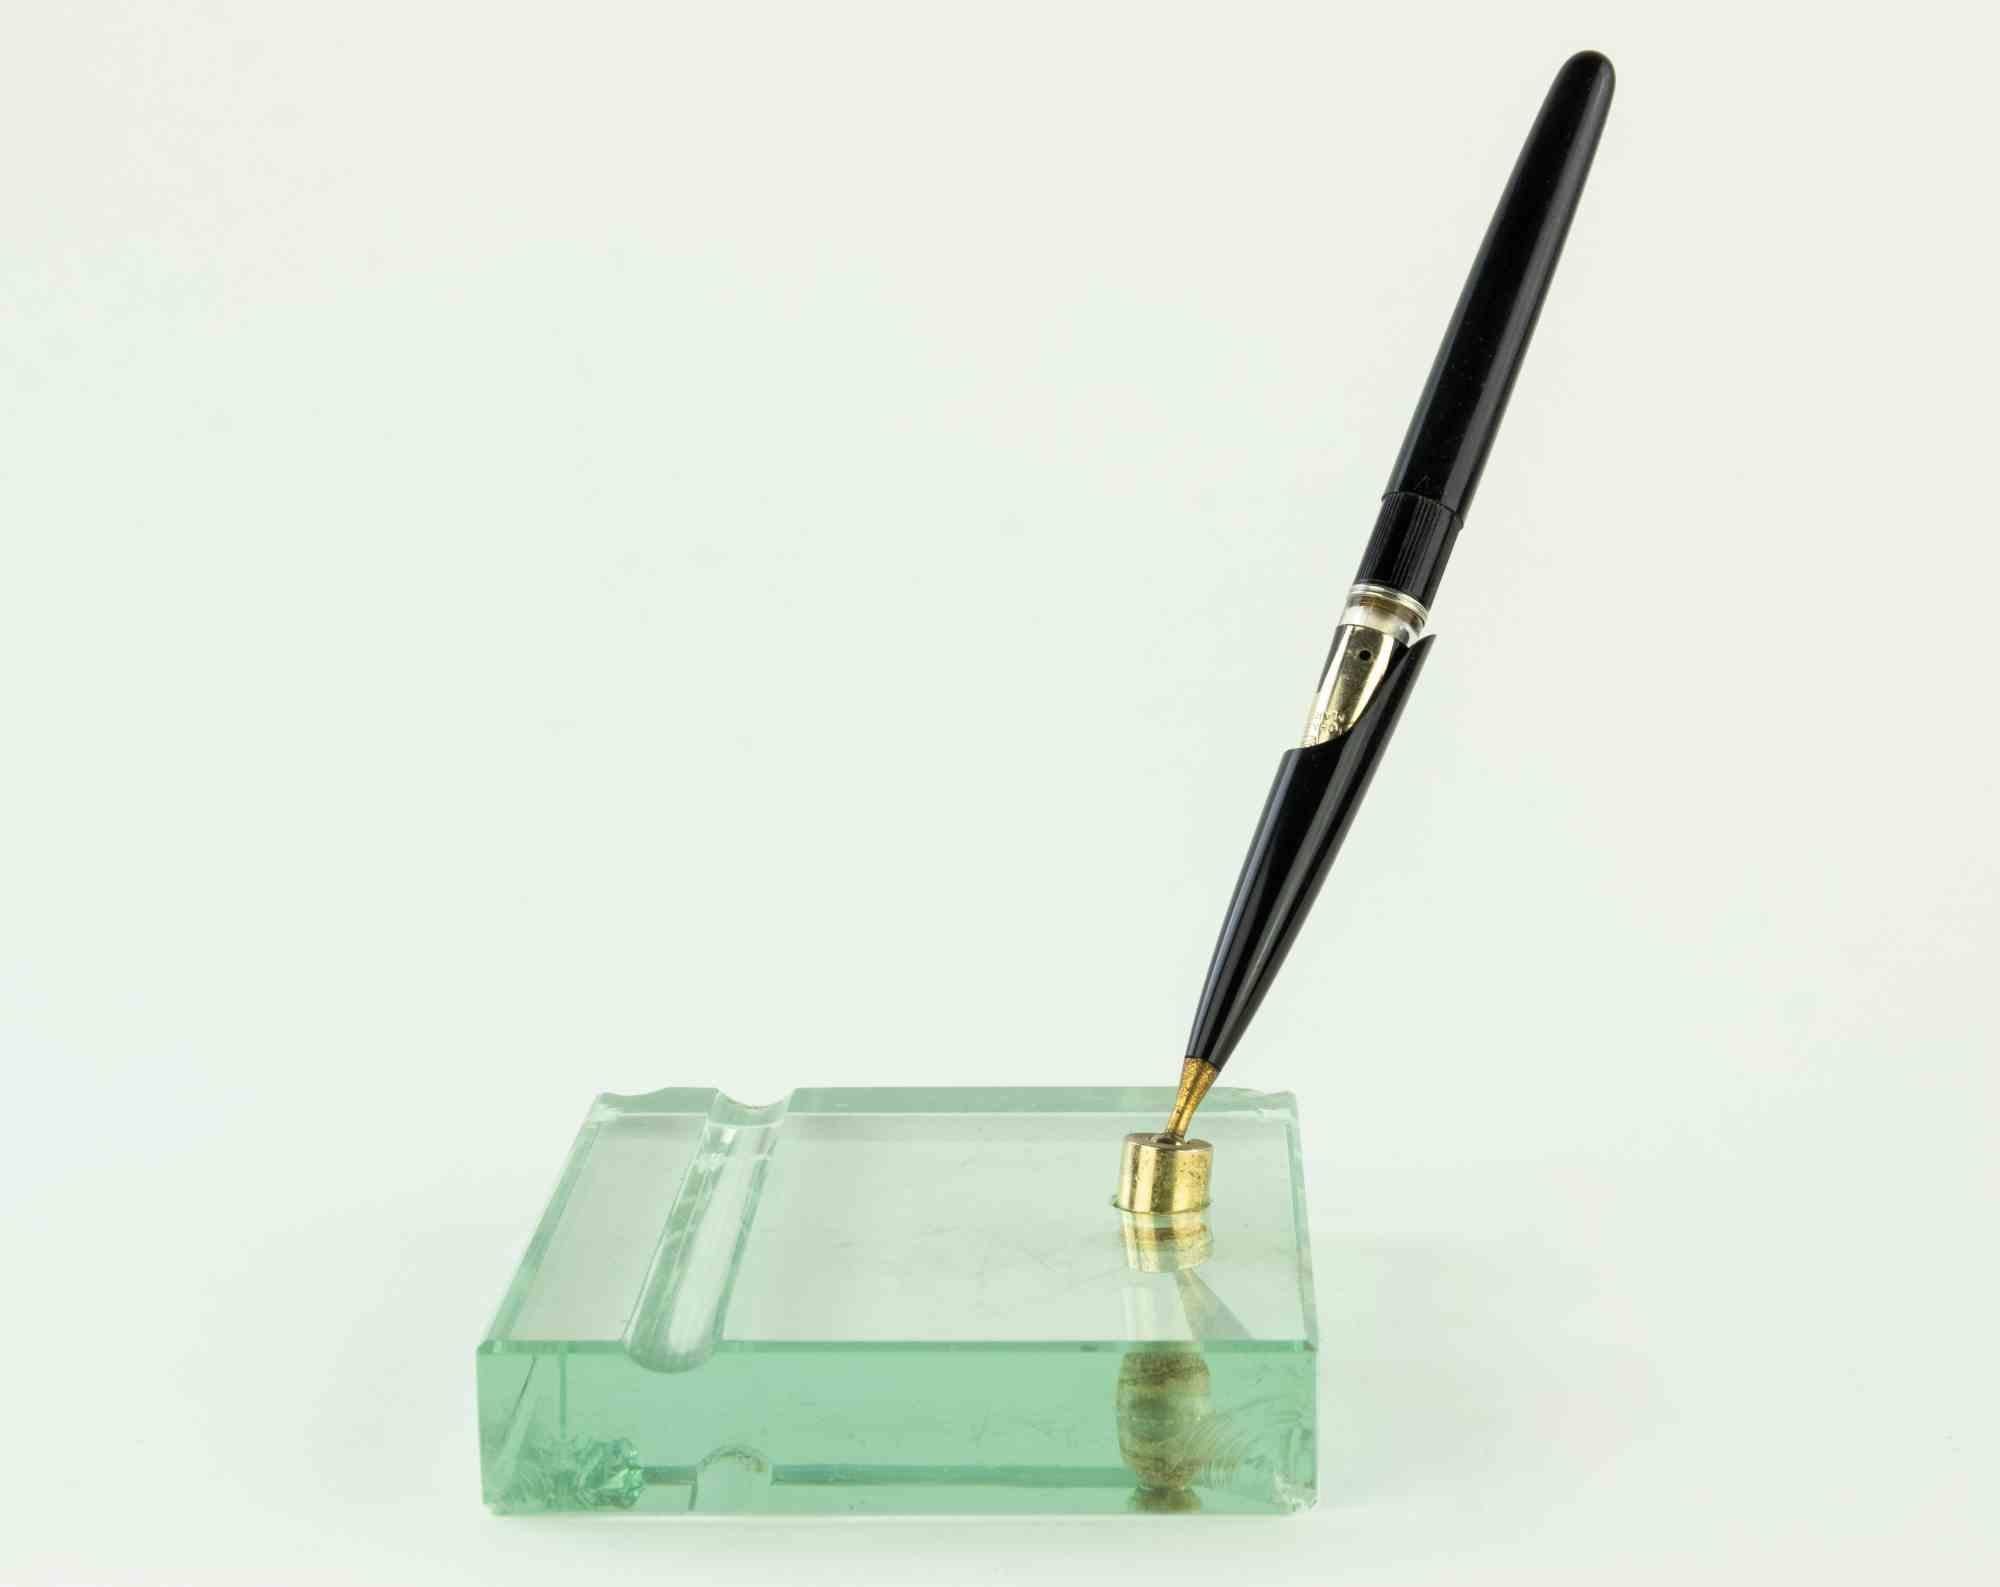 Vintage Pen holder is a decorative object realized in the 1960s.

A decorative pen holder with art glass base. Good condition except for some minor chips.

An elegant object to be collect.